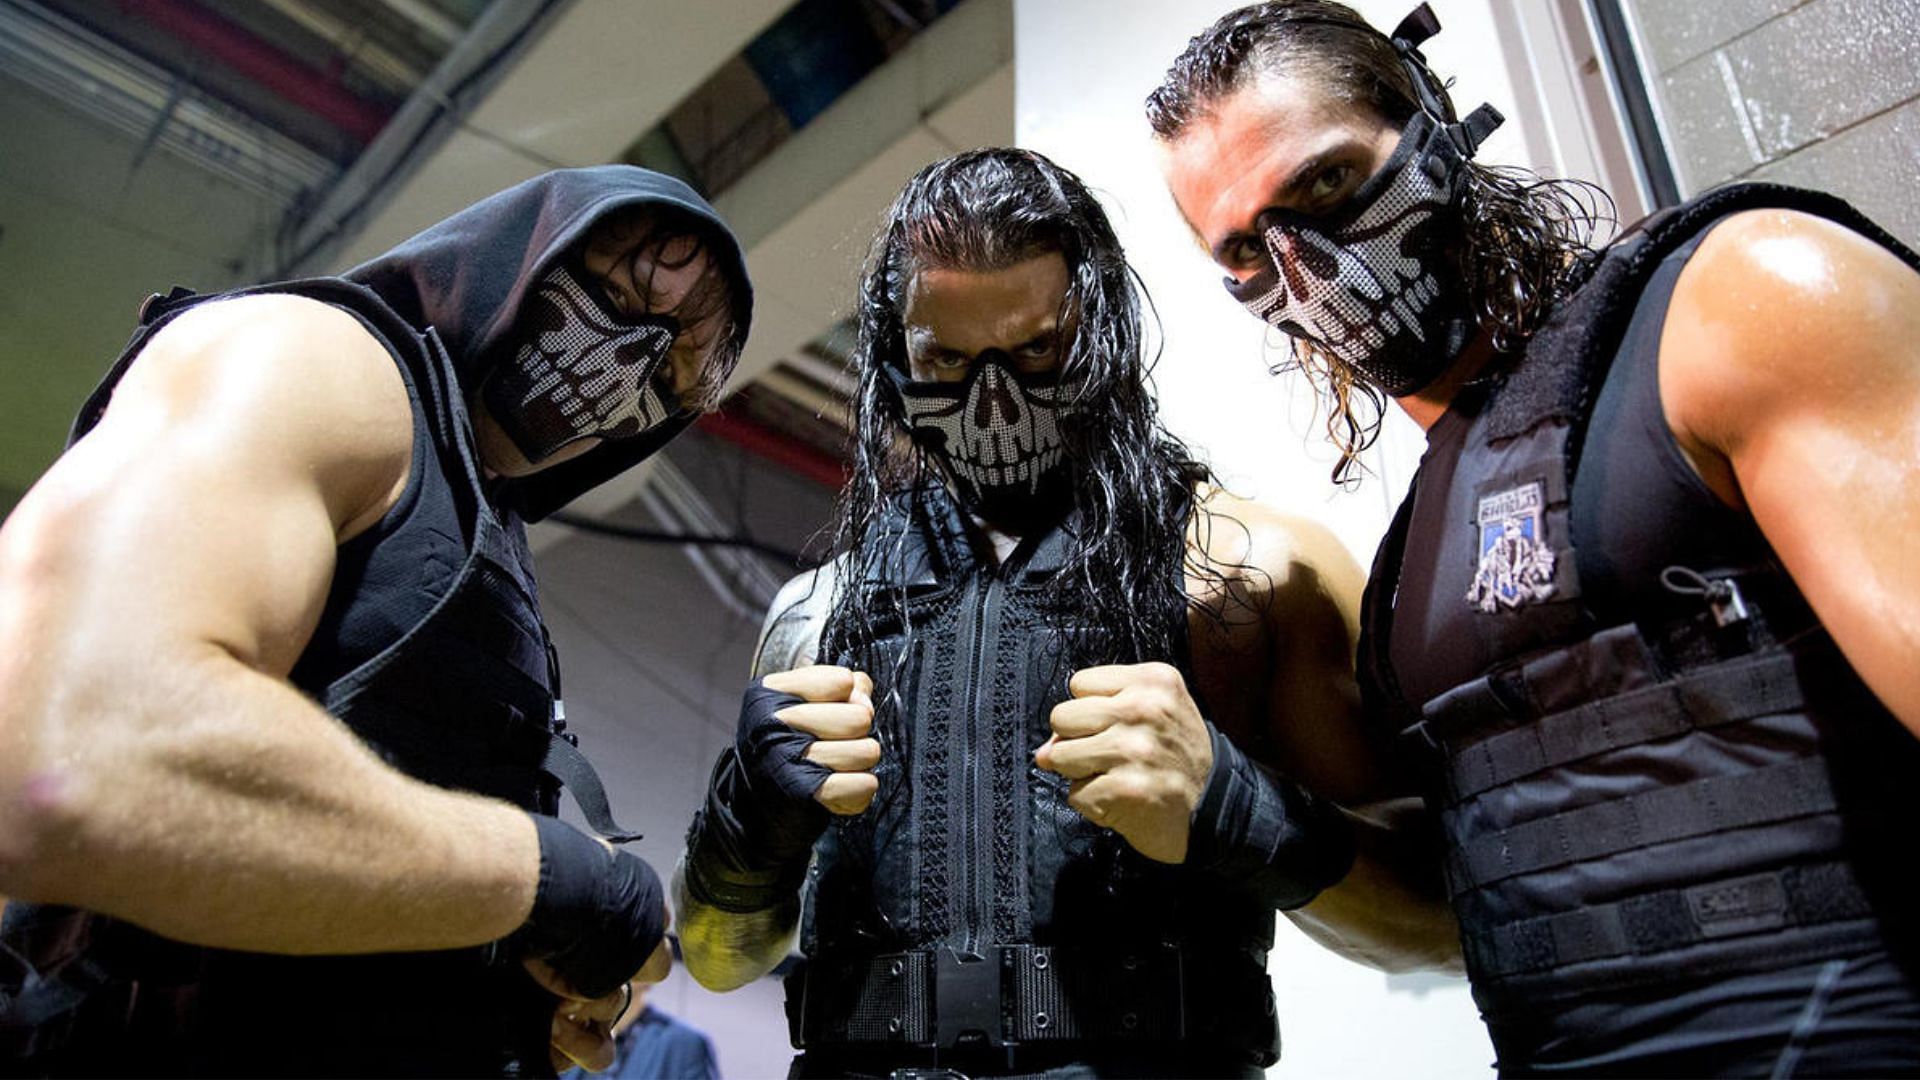 The Shield (From L to R): Dean Ambrose, Roman Reigns, and Seth Rollins